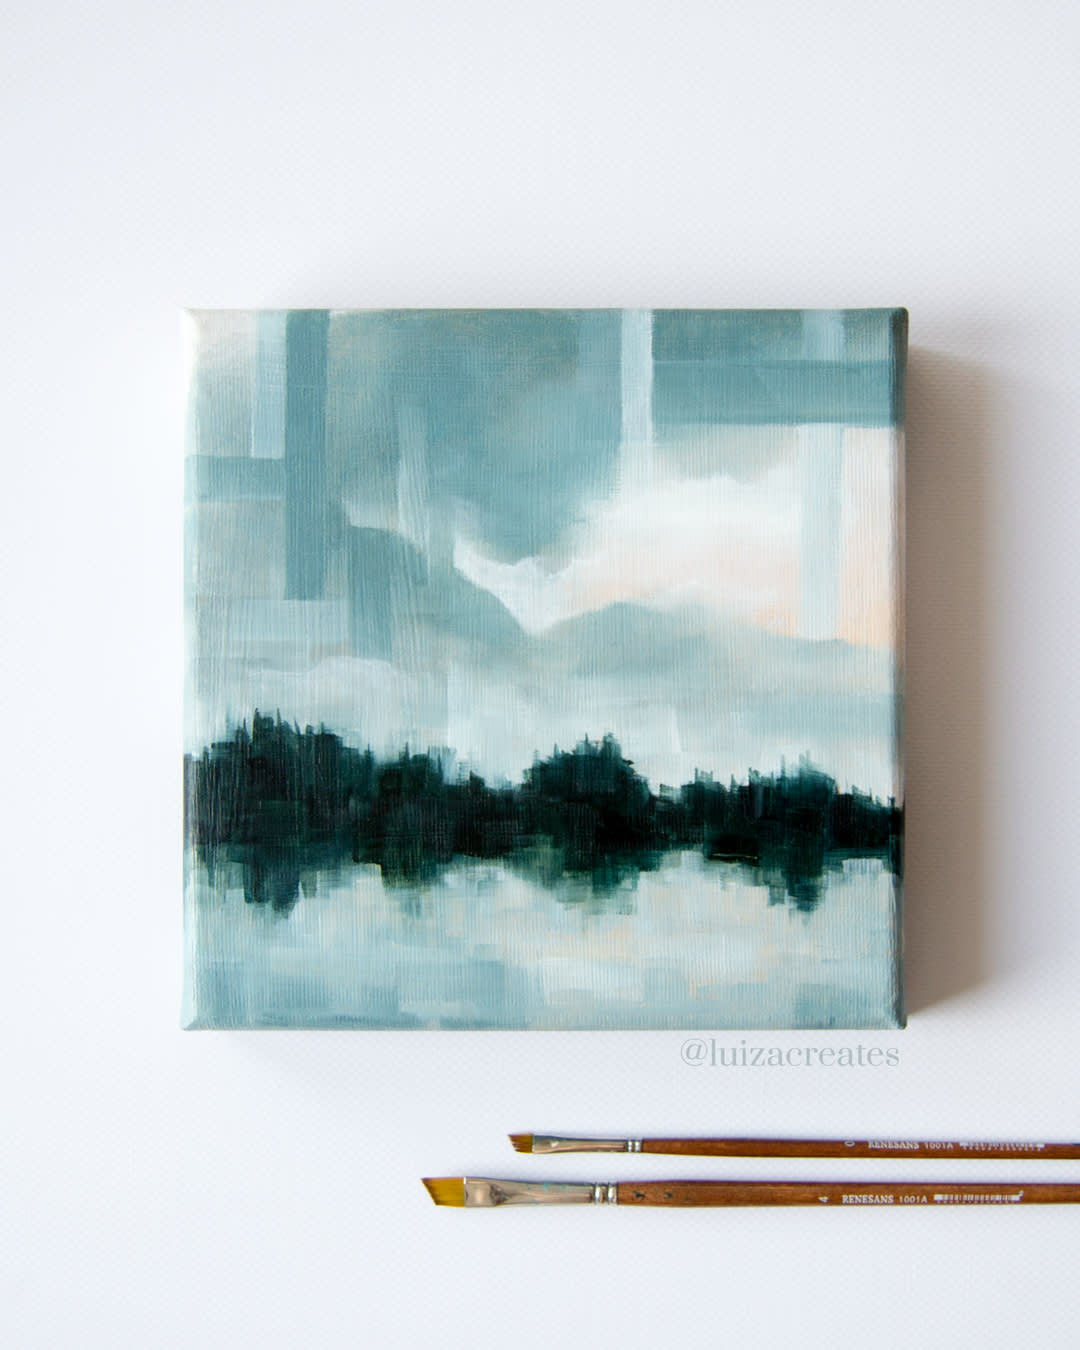 I've been trying to make my landscape paintings a bit more abstract. Here's a mini, its title is Cool Blue Water :)